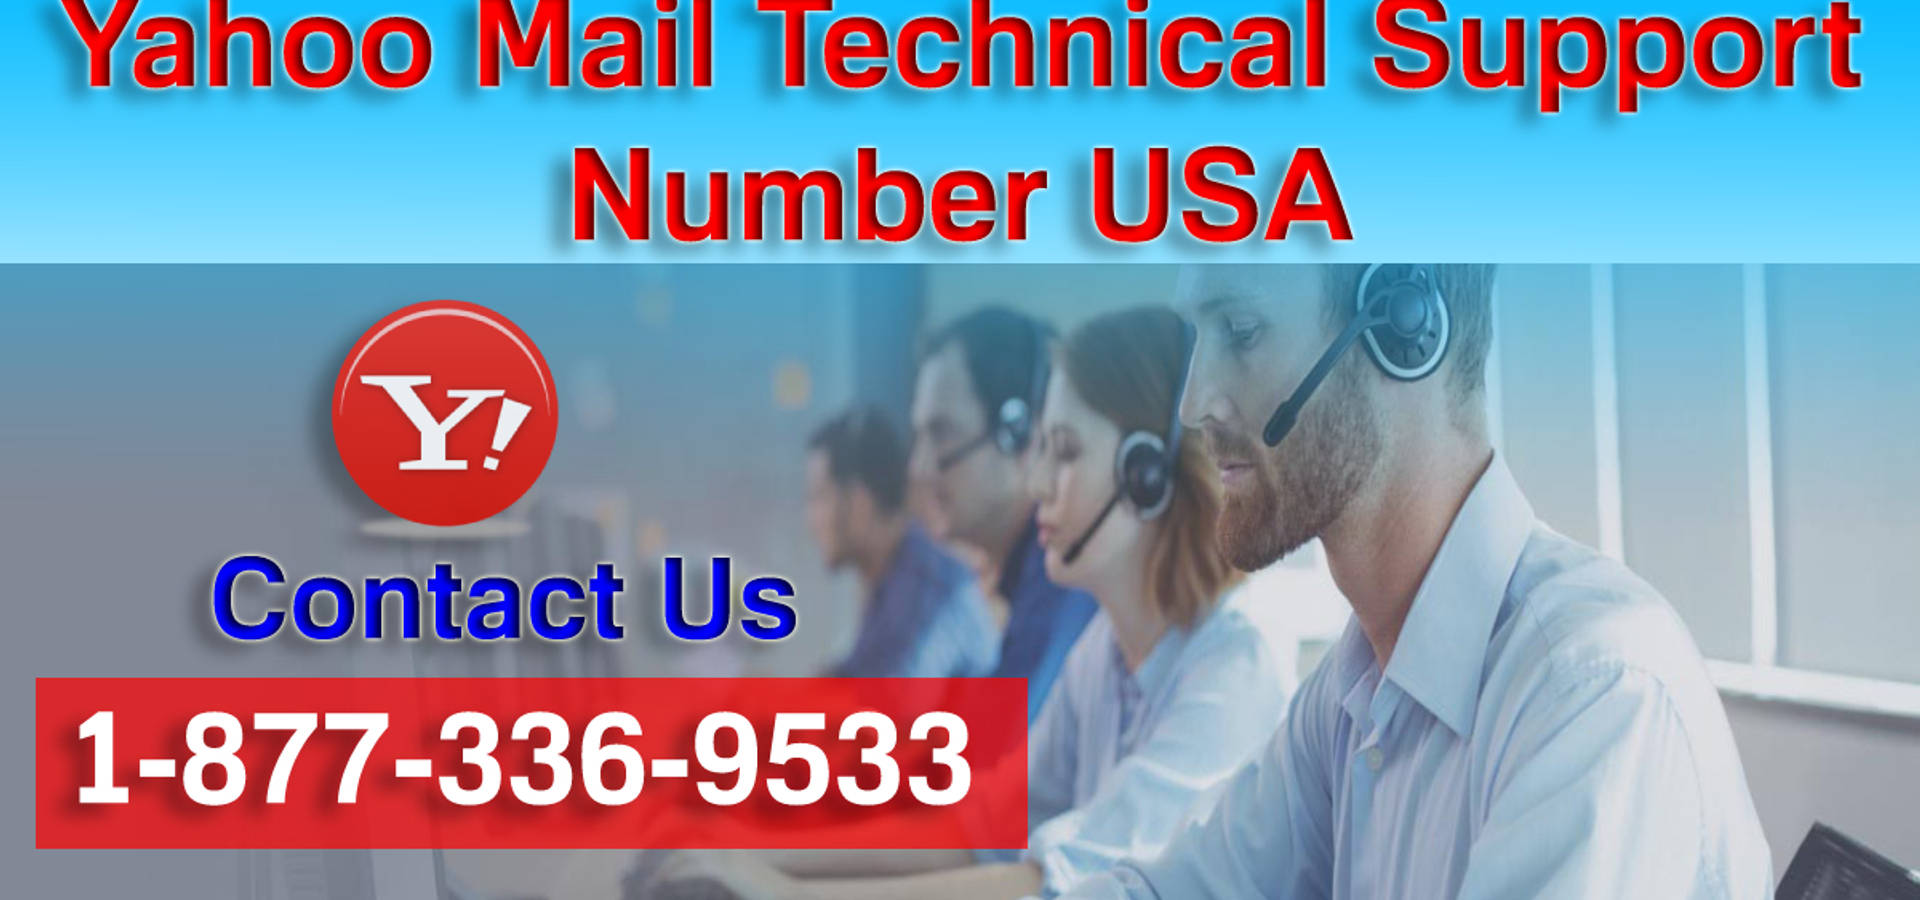 Yahoo Mail Support Number 1-877-336-9533 USA